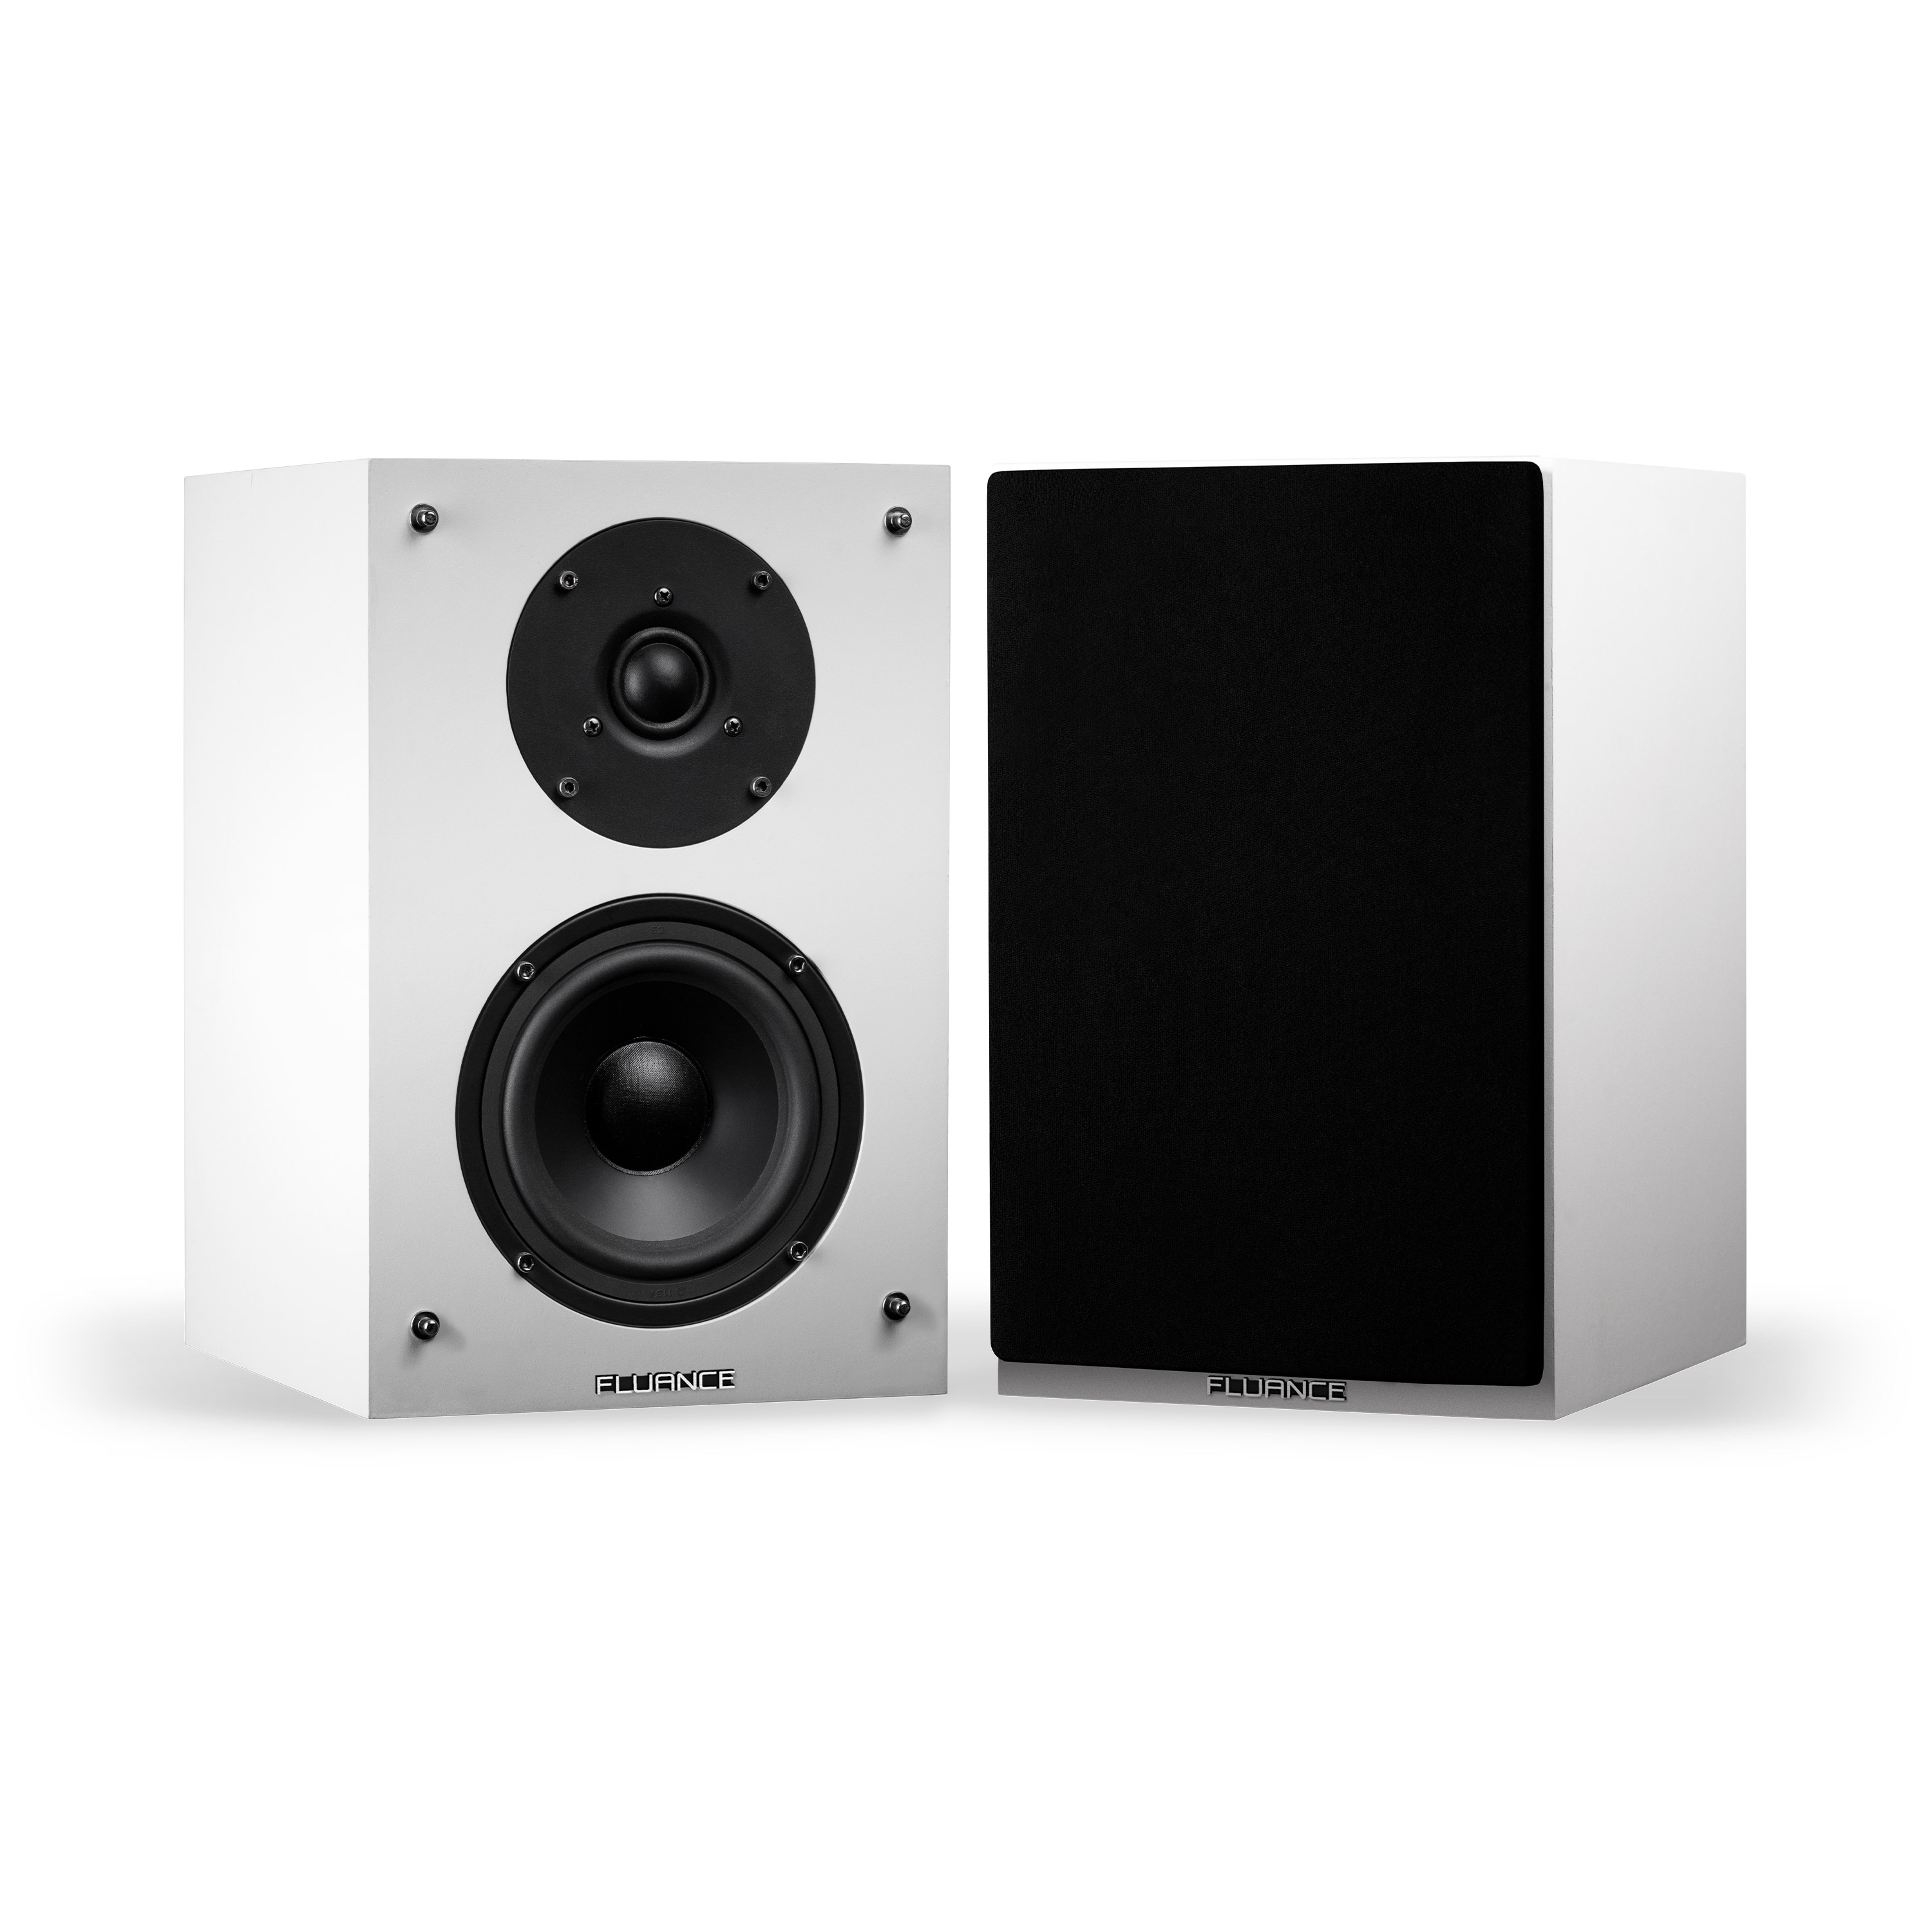 Fluance Elite Compact Home Theater 5.0 Speaker System - White - image 2 of 7